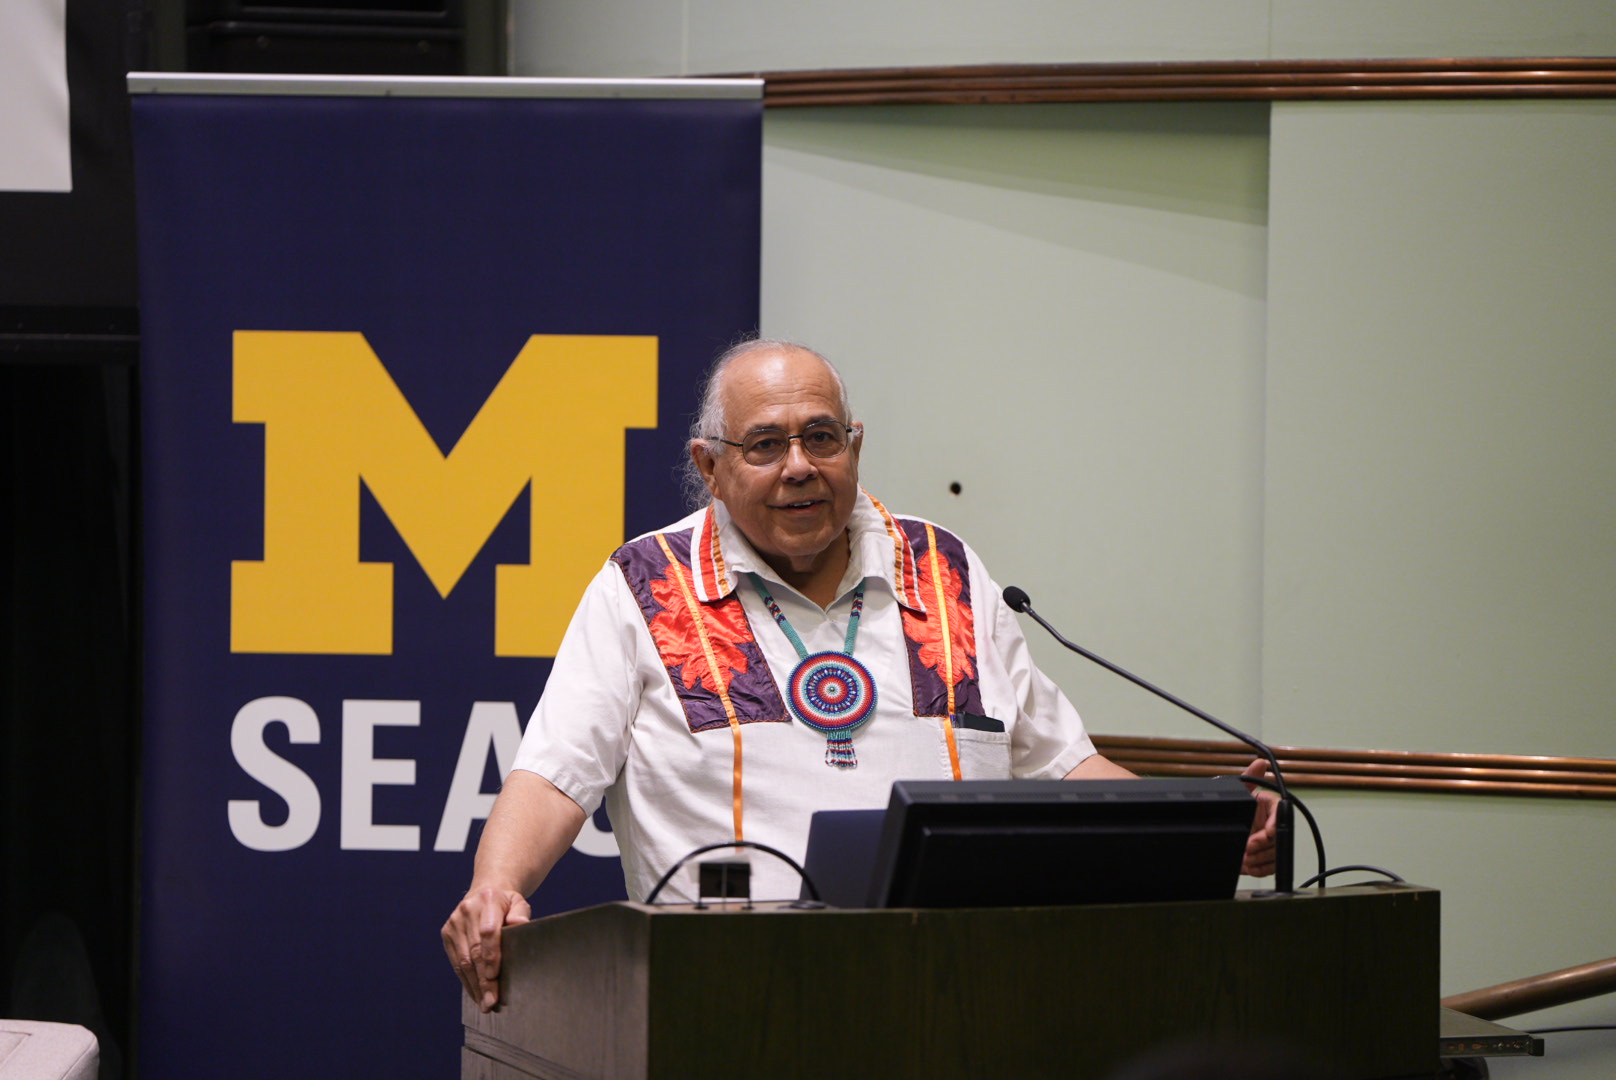 Frank Ettawageshik, executive director of the United Tribes of Michigan spoke at the Great Lakes Compact Symposium.